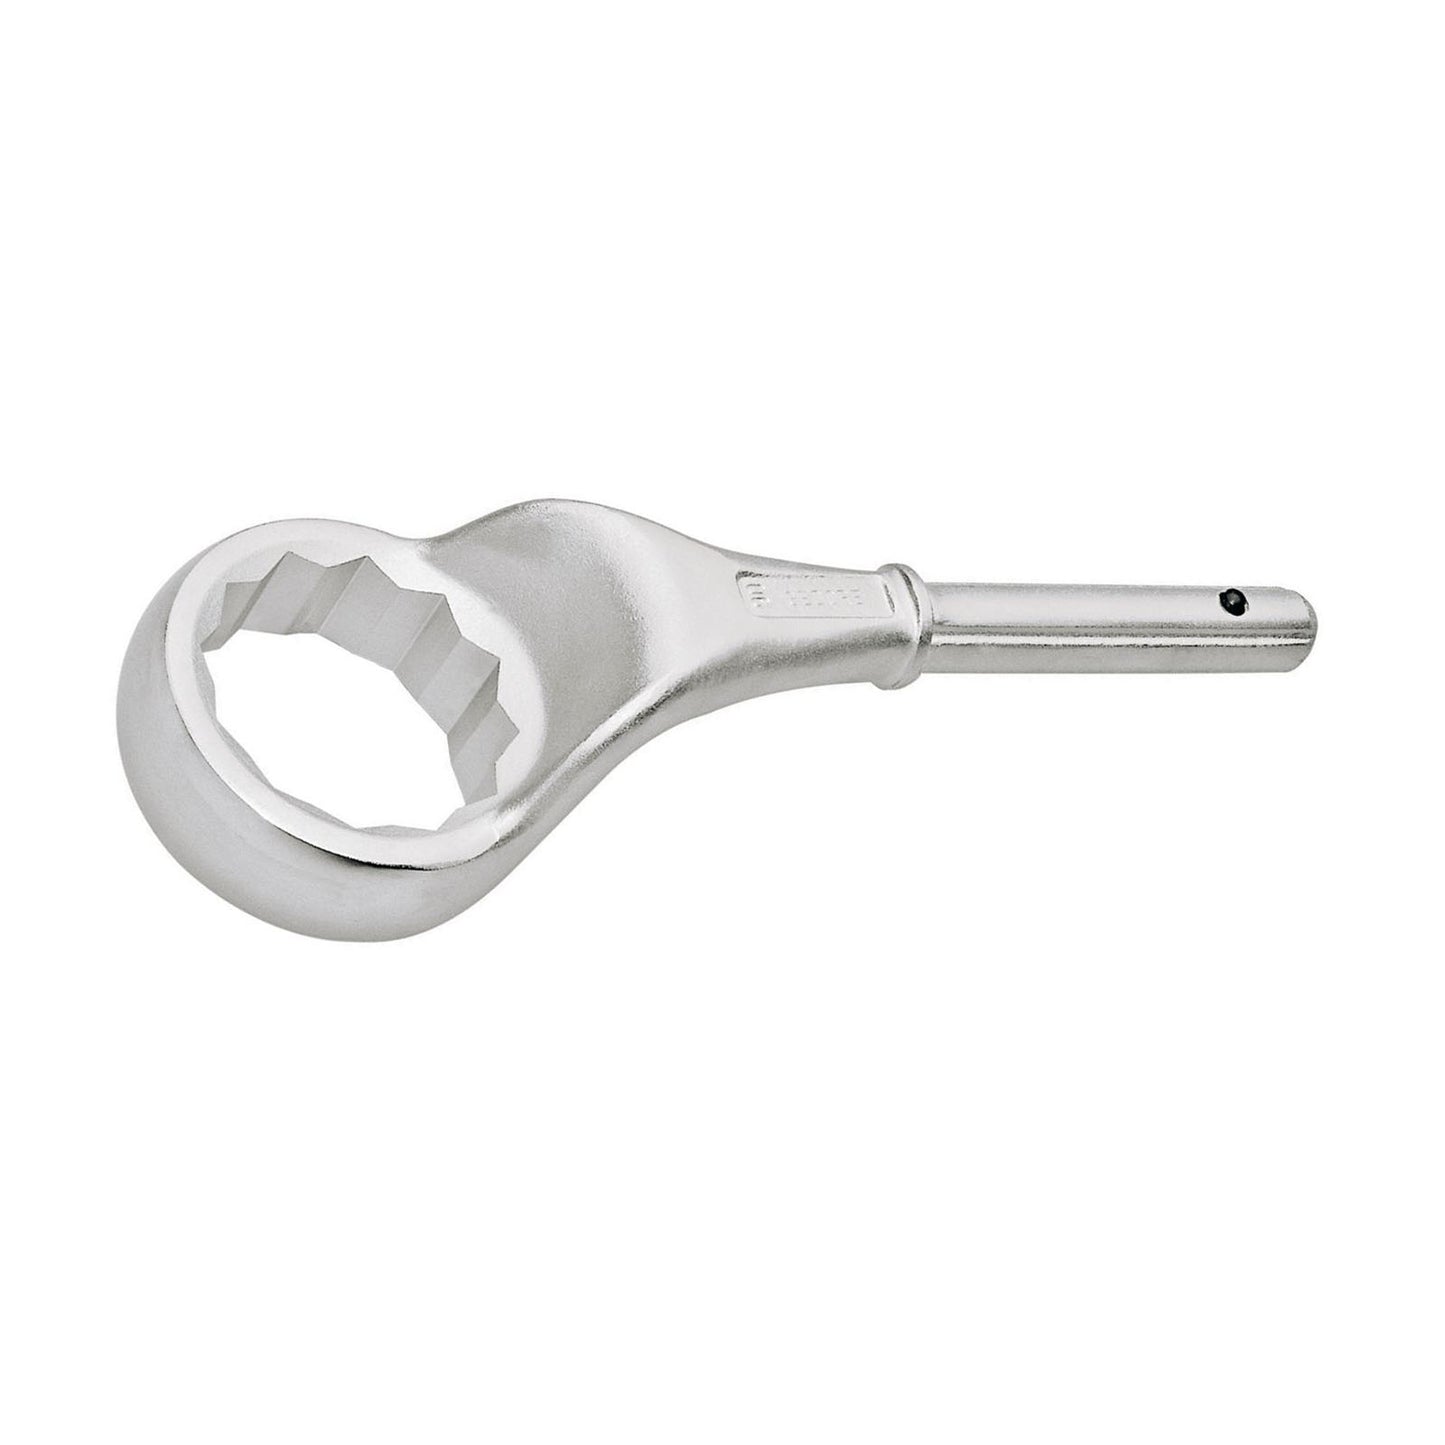 GEDORE 2 A 90 - Traction Wrench, 90mm (6035540)